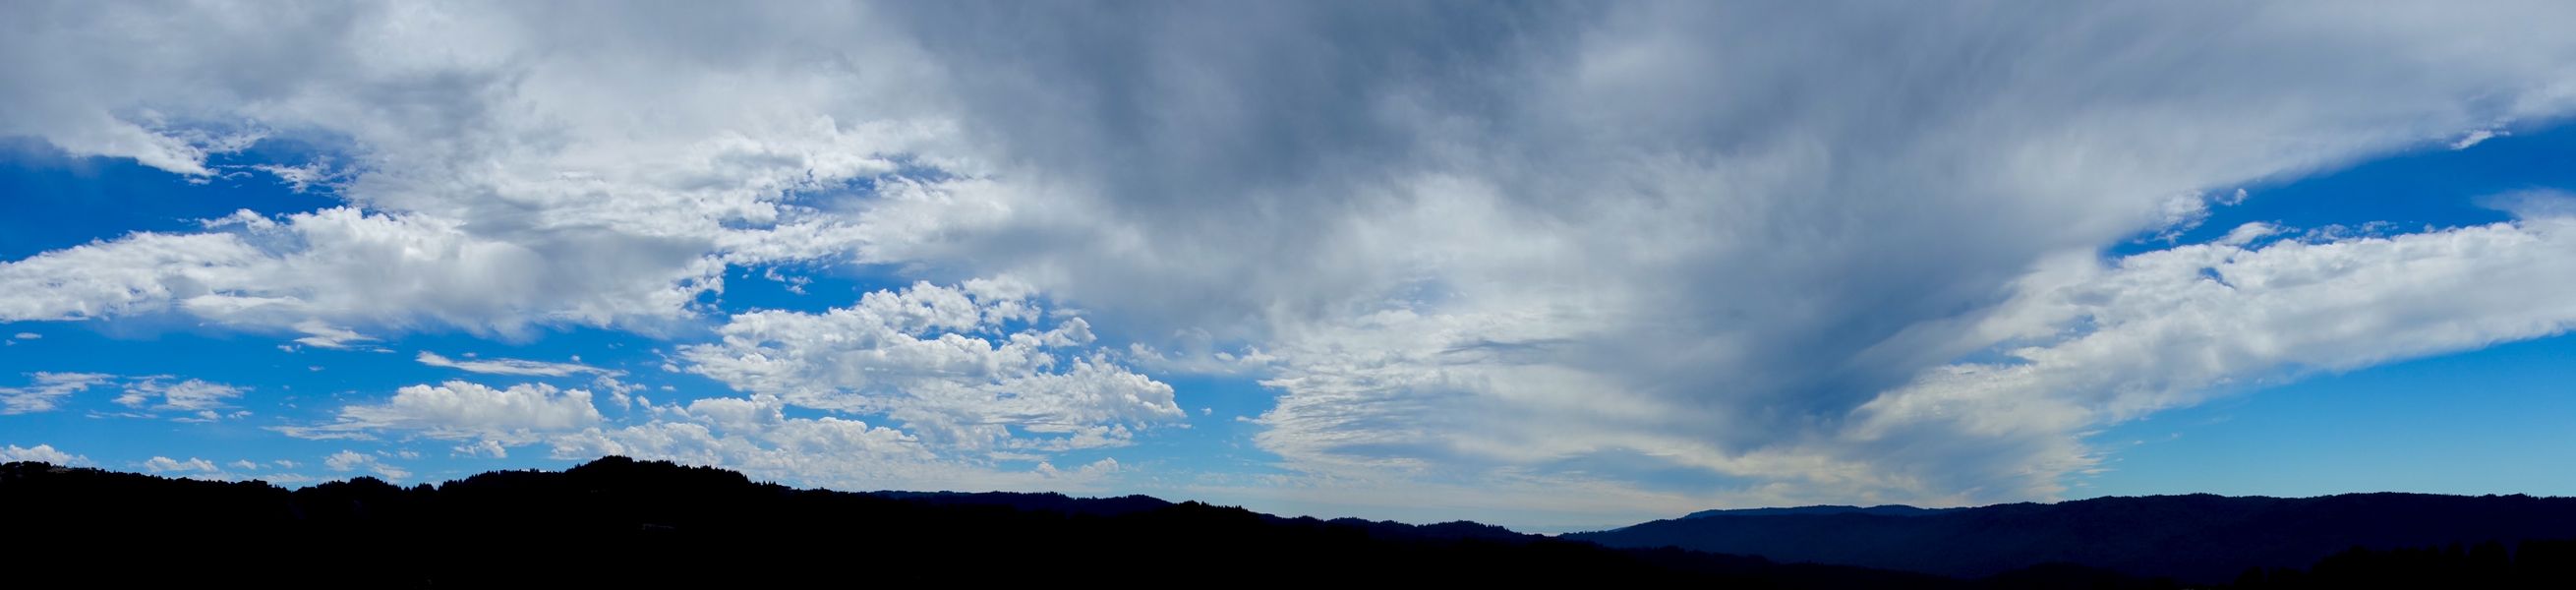 Tropical Clouds over Alpine Road - 8/2013